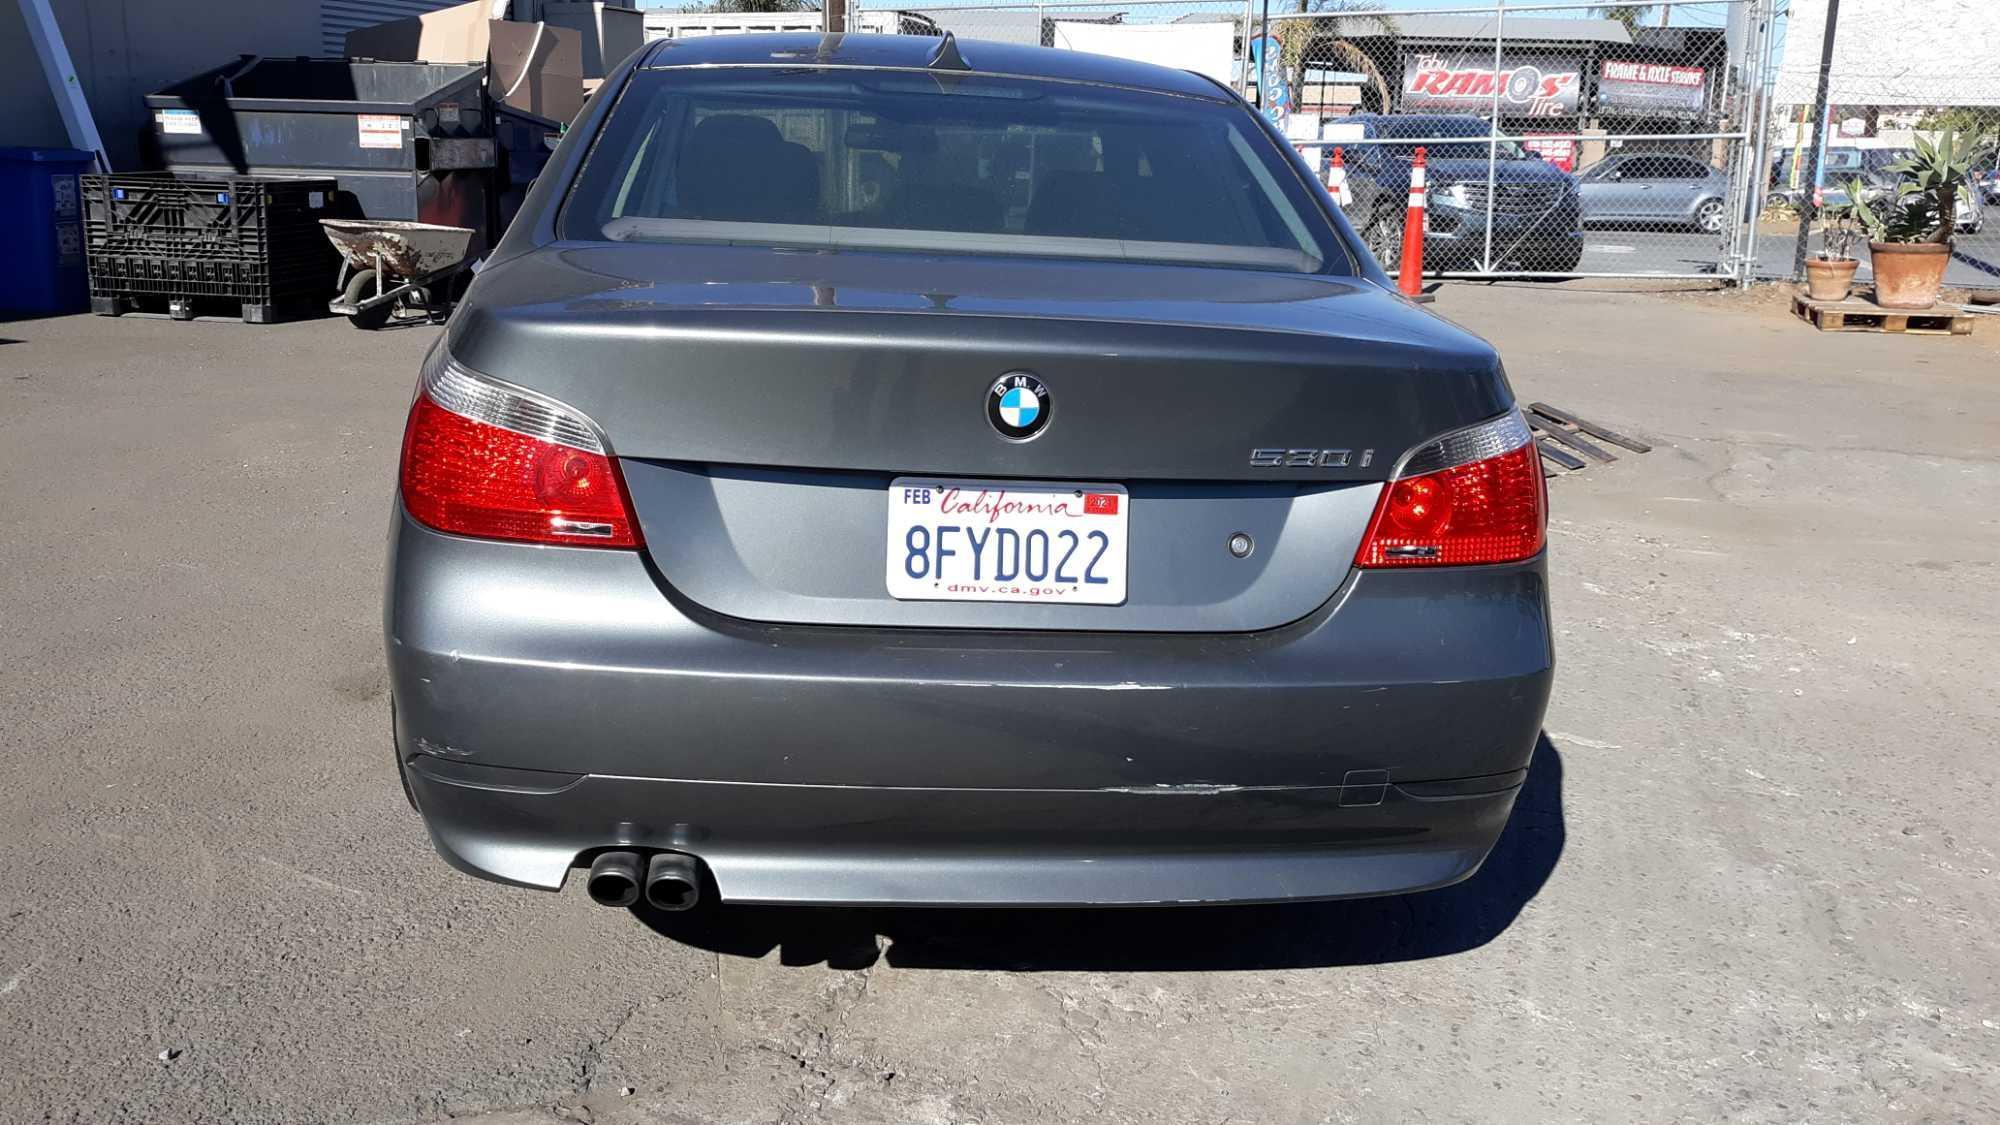 2006 BMW 530i***FOR DEALER/DISMANTLER/EXPORT ONLY***WAS DRIVEN TO FISCHER LOT***